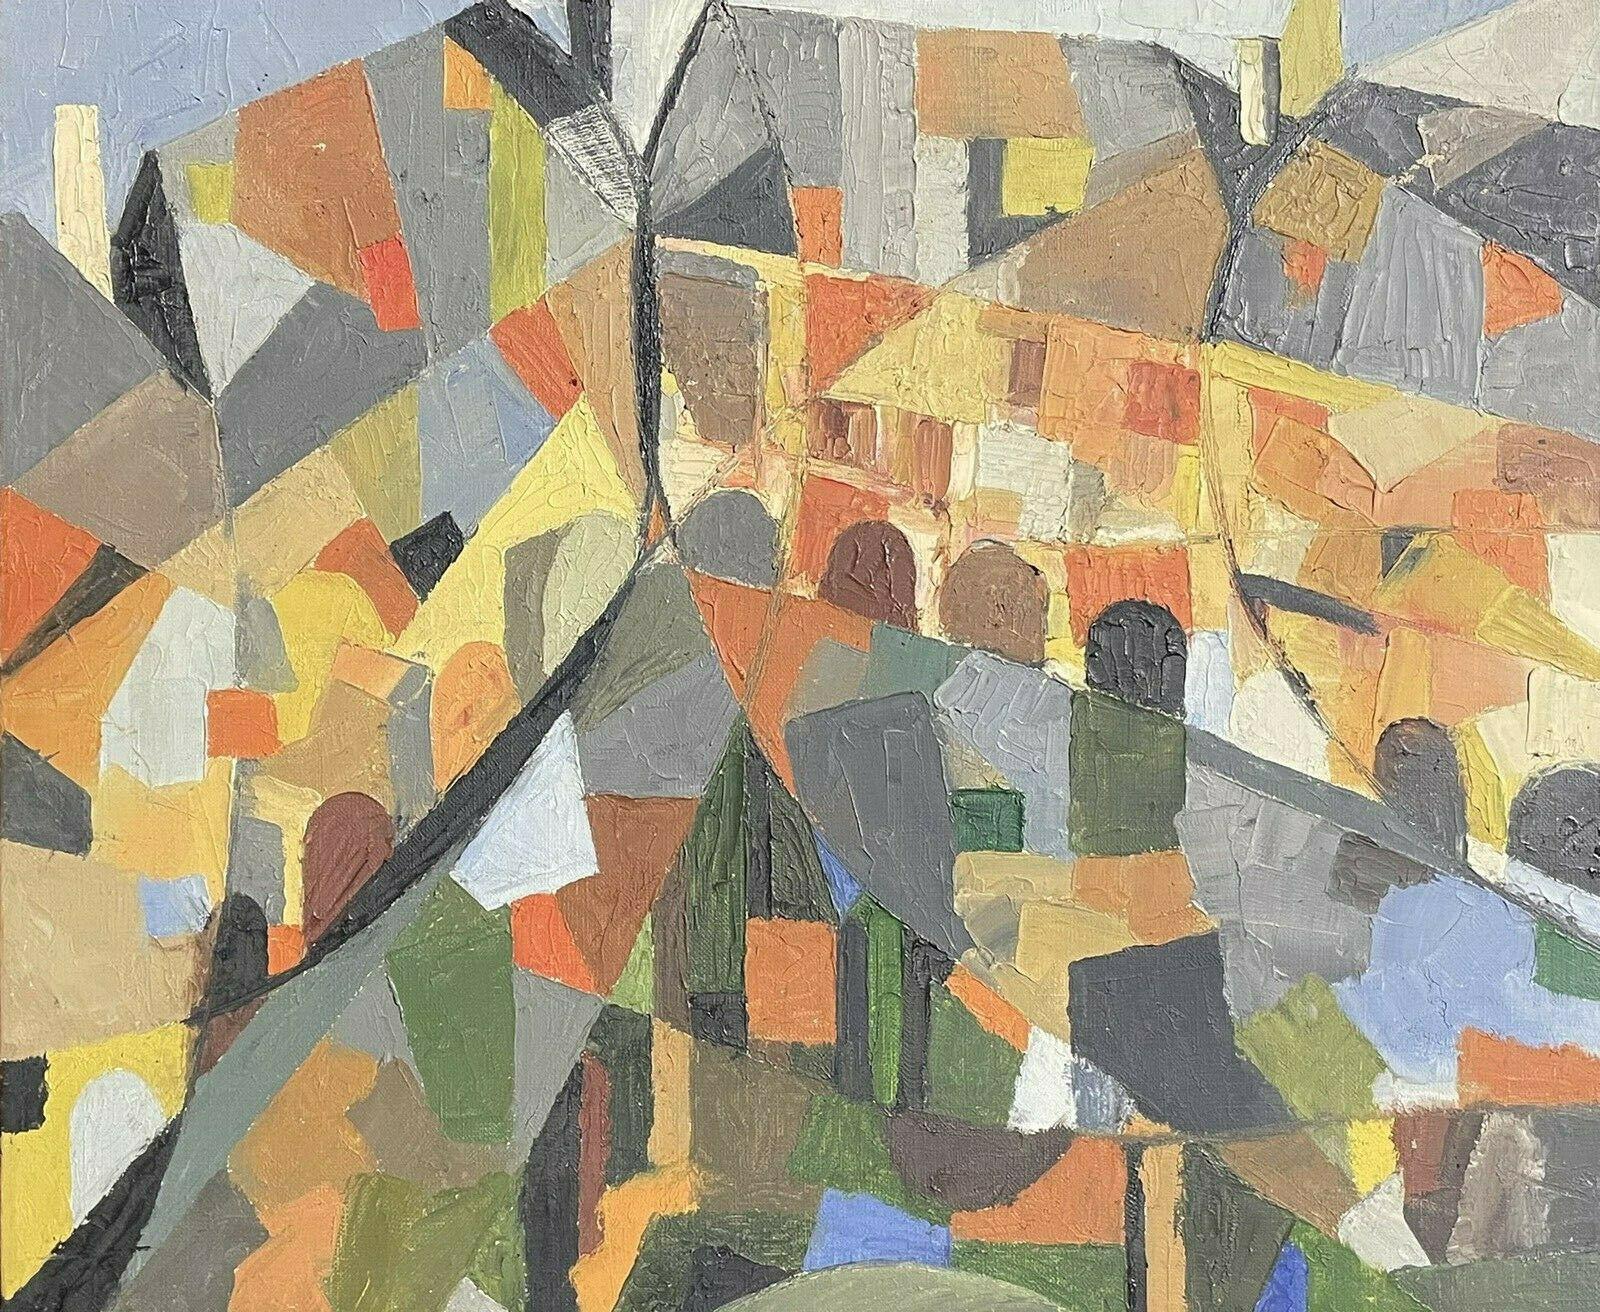 Unknown Abstract Painting - 1950's French Cubist Oil Painting View of an Old Town & Houses - Moody Colors